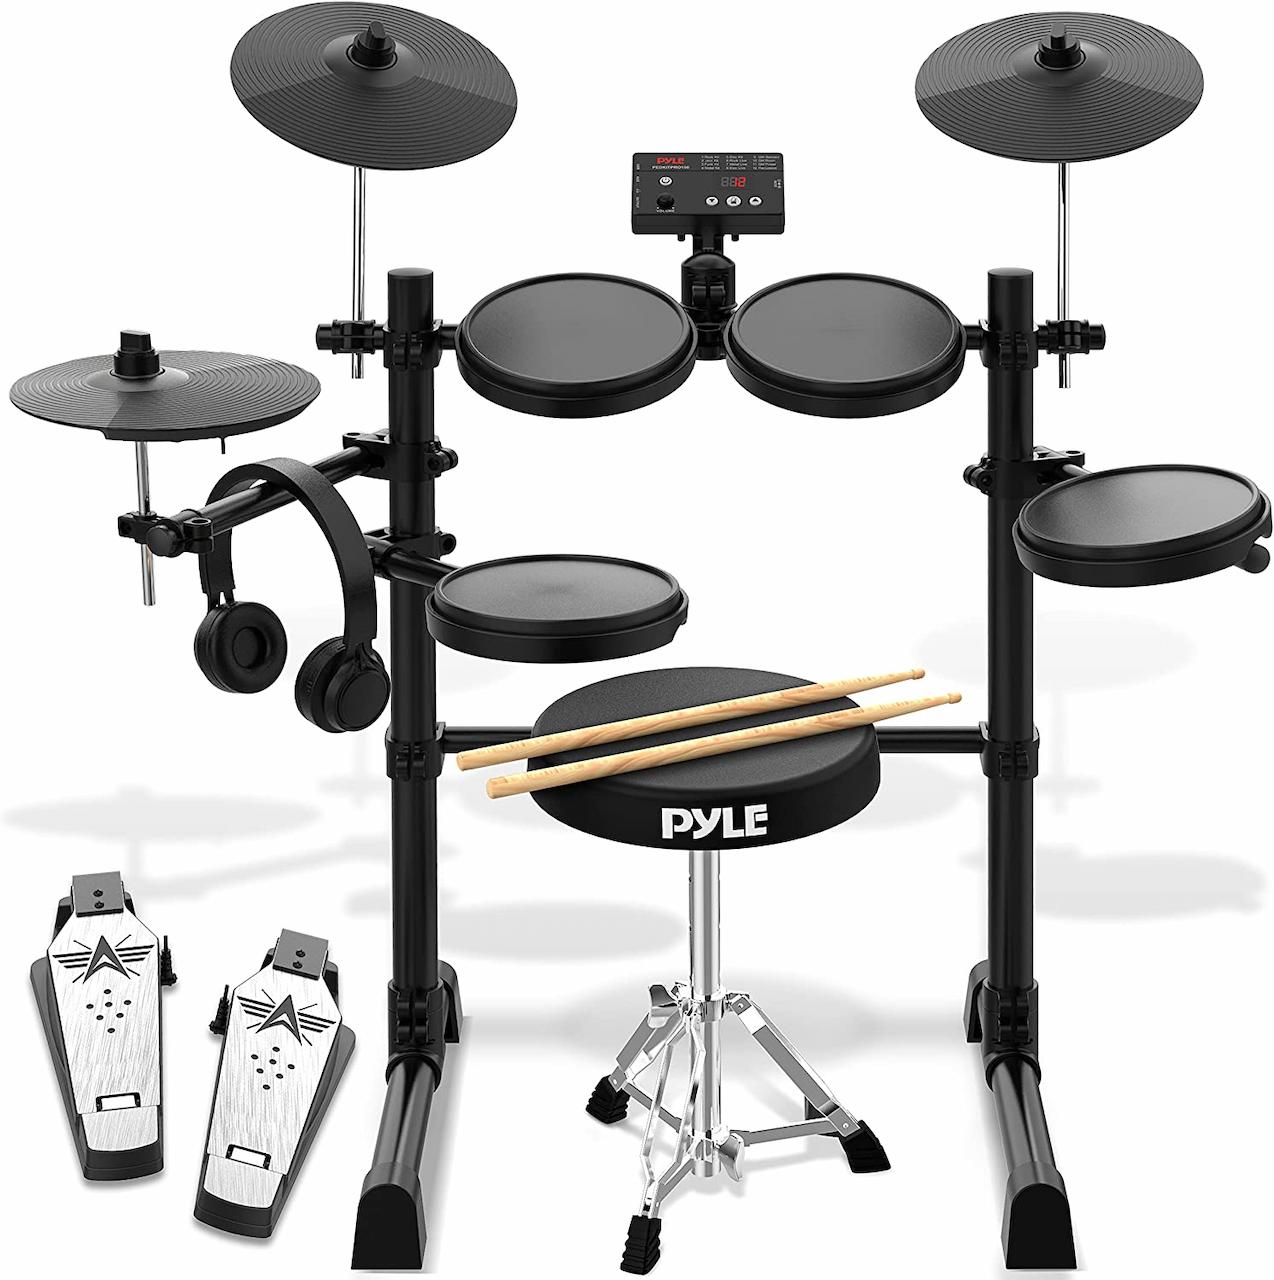 Should You Go For An Acoustic Or Electric Drum Kit?